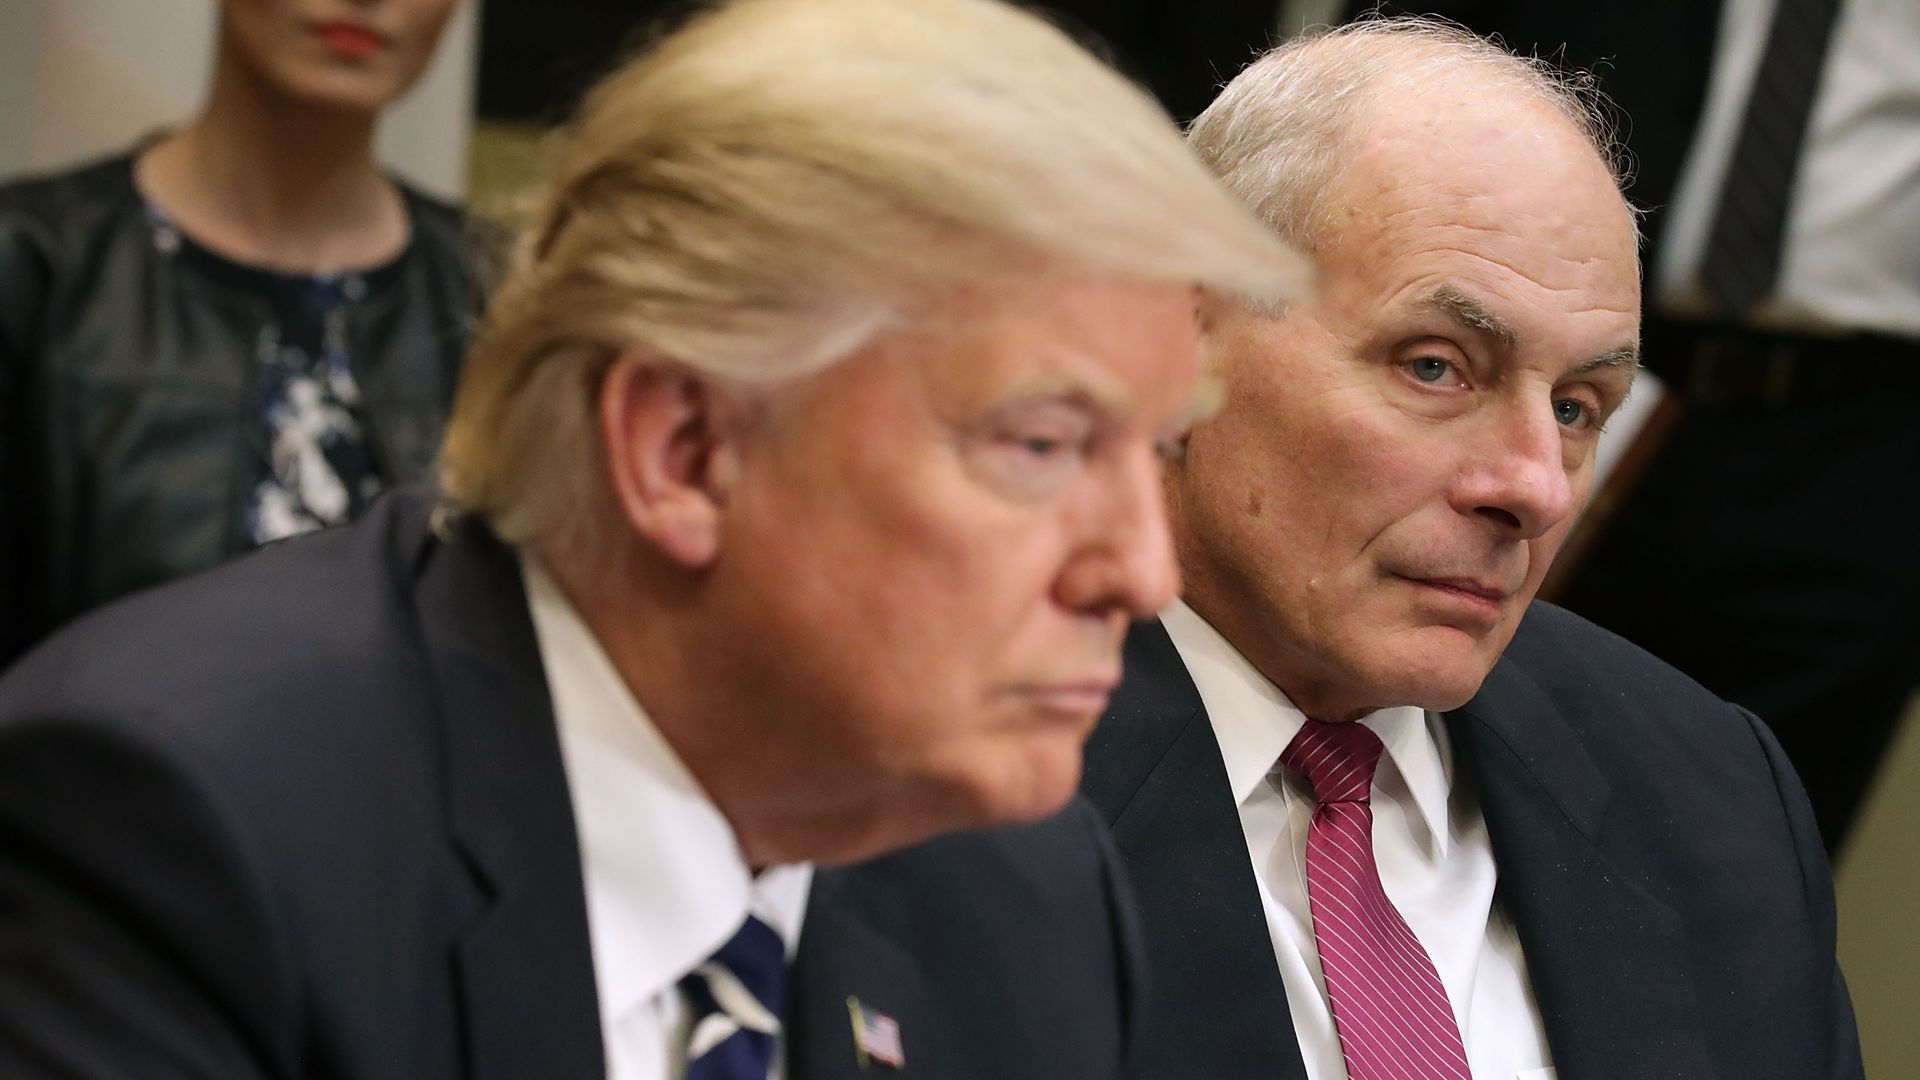 John Kelly next to President Trump in the White House in January 2017.